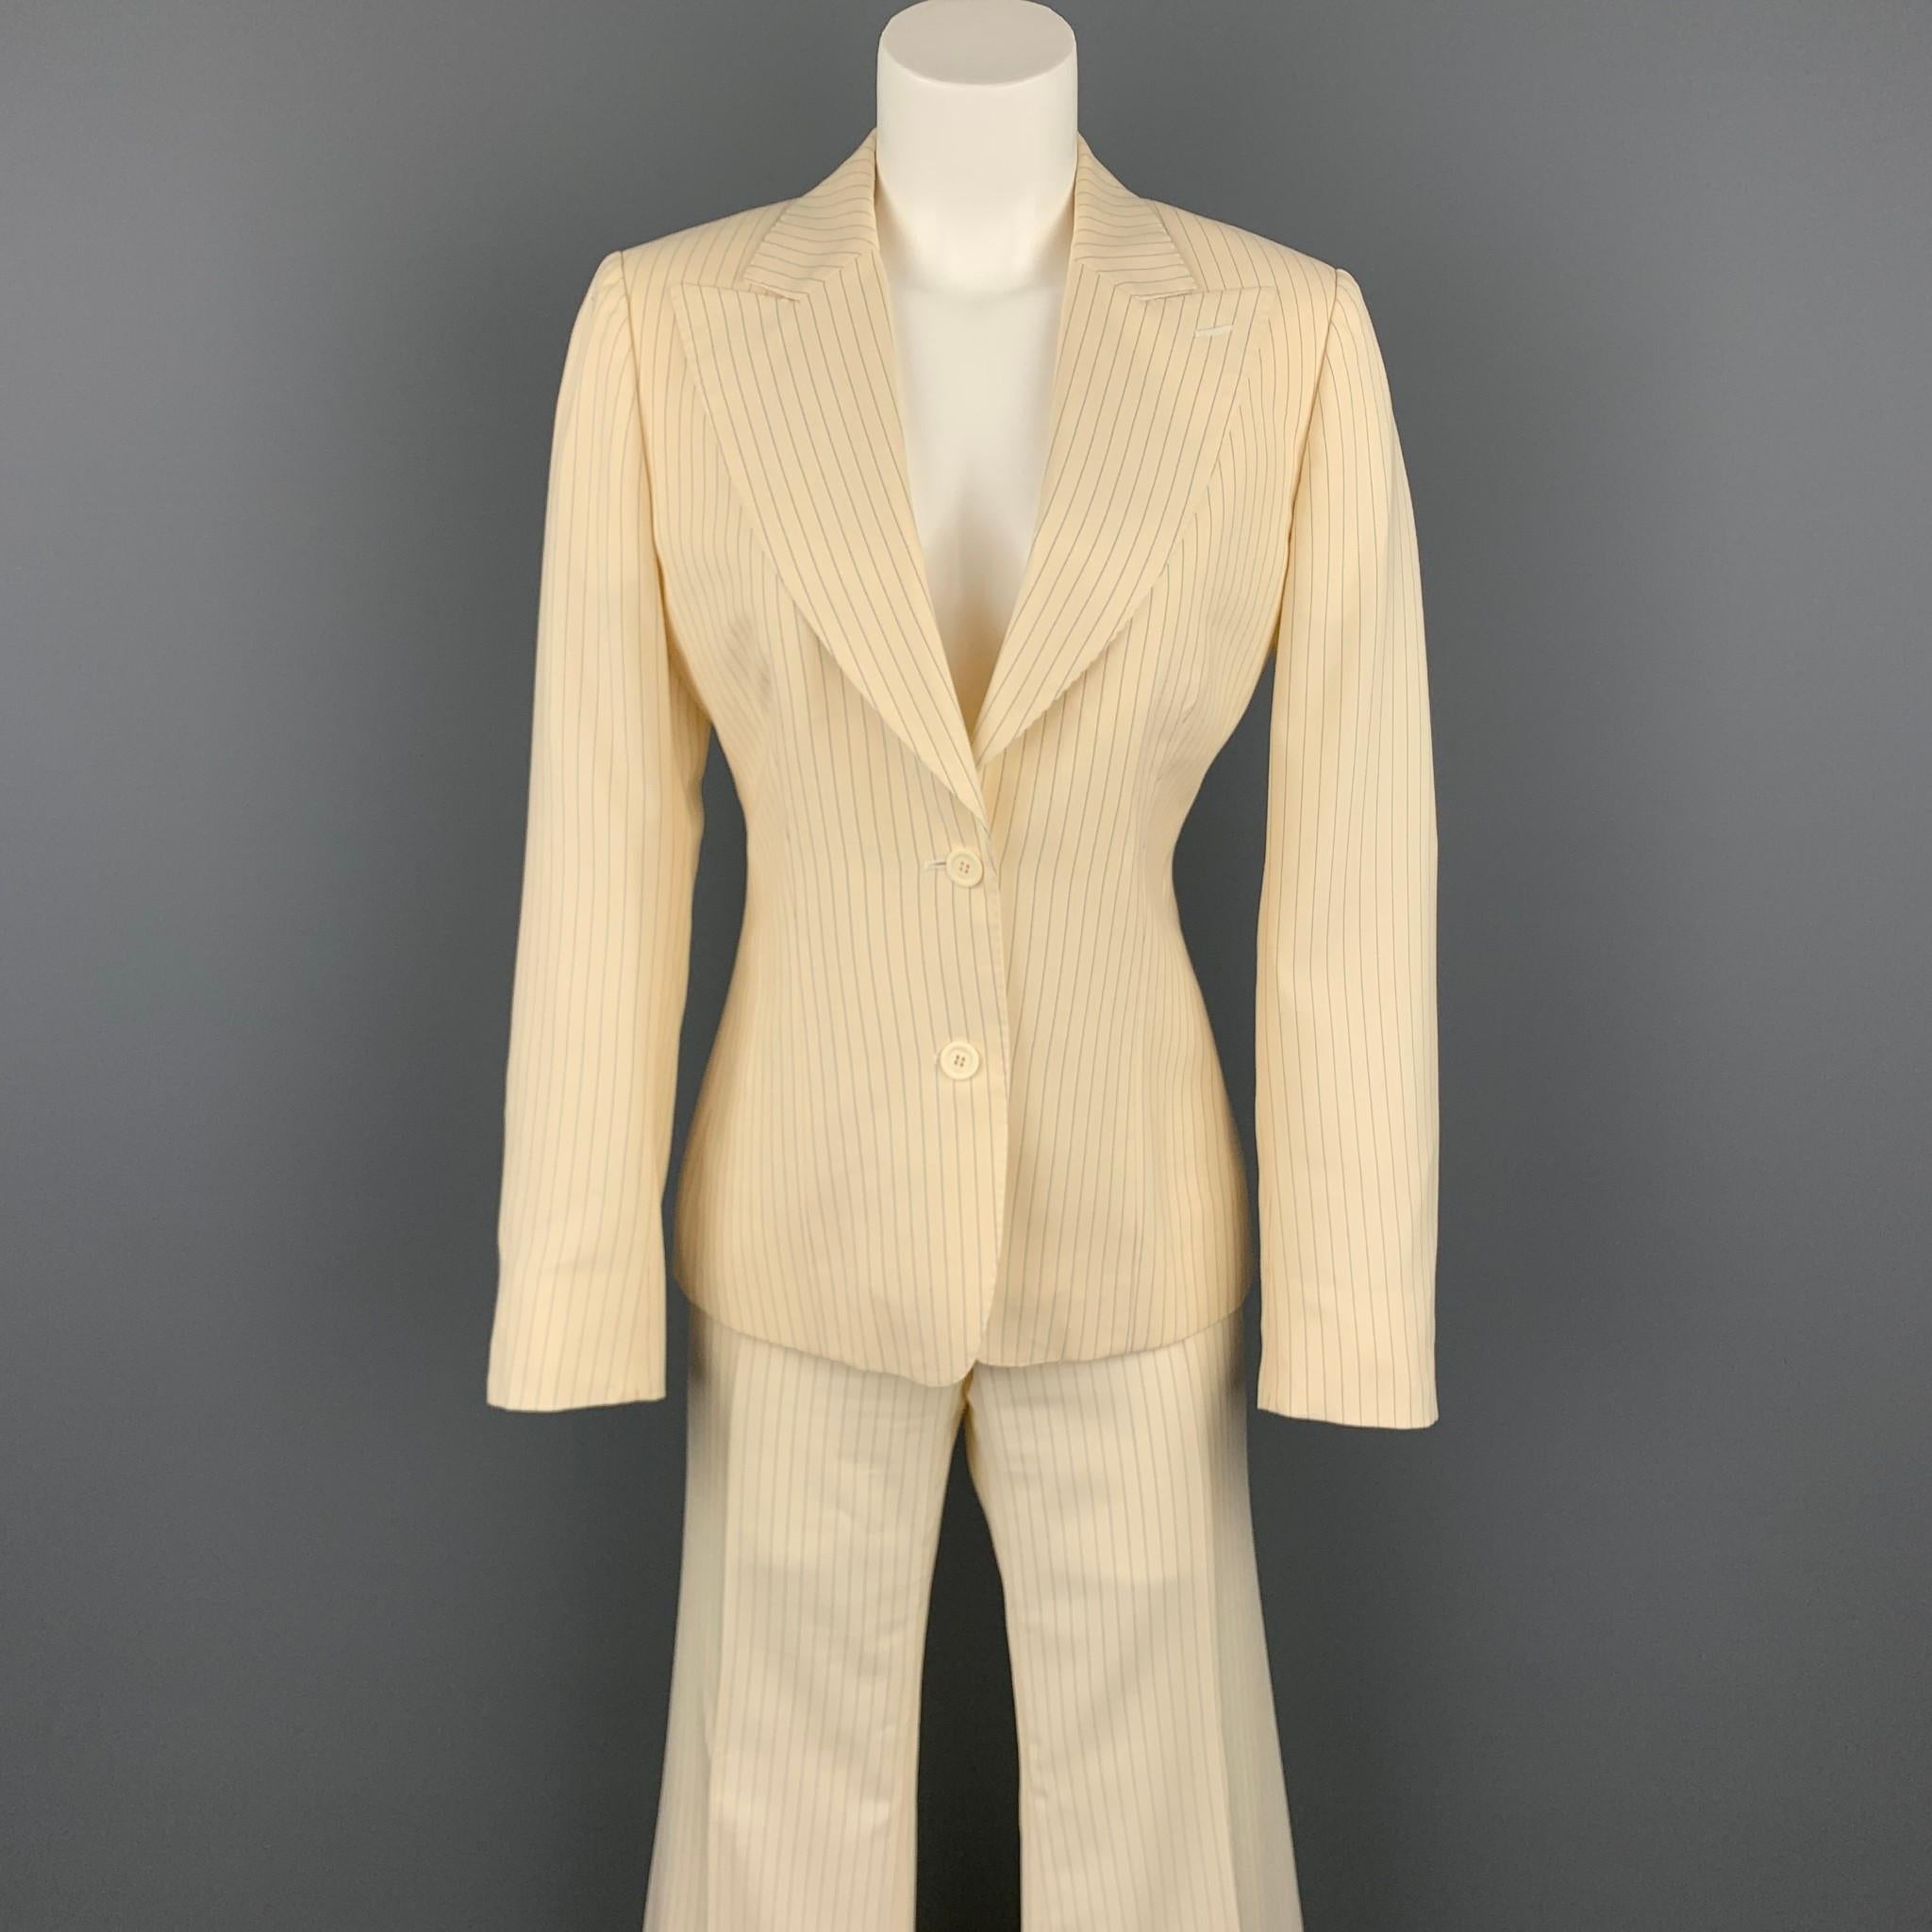 GUCCI suit comes in a cream & navy pinstripe wool with a full liner and includes a single breasted, two button sport coat with a peak lapel and matching  wide leg front trousers. Made in Italy.

Very Good Pre-Owned Condition.
Marked: IT